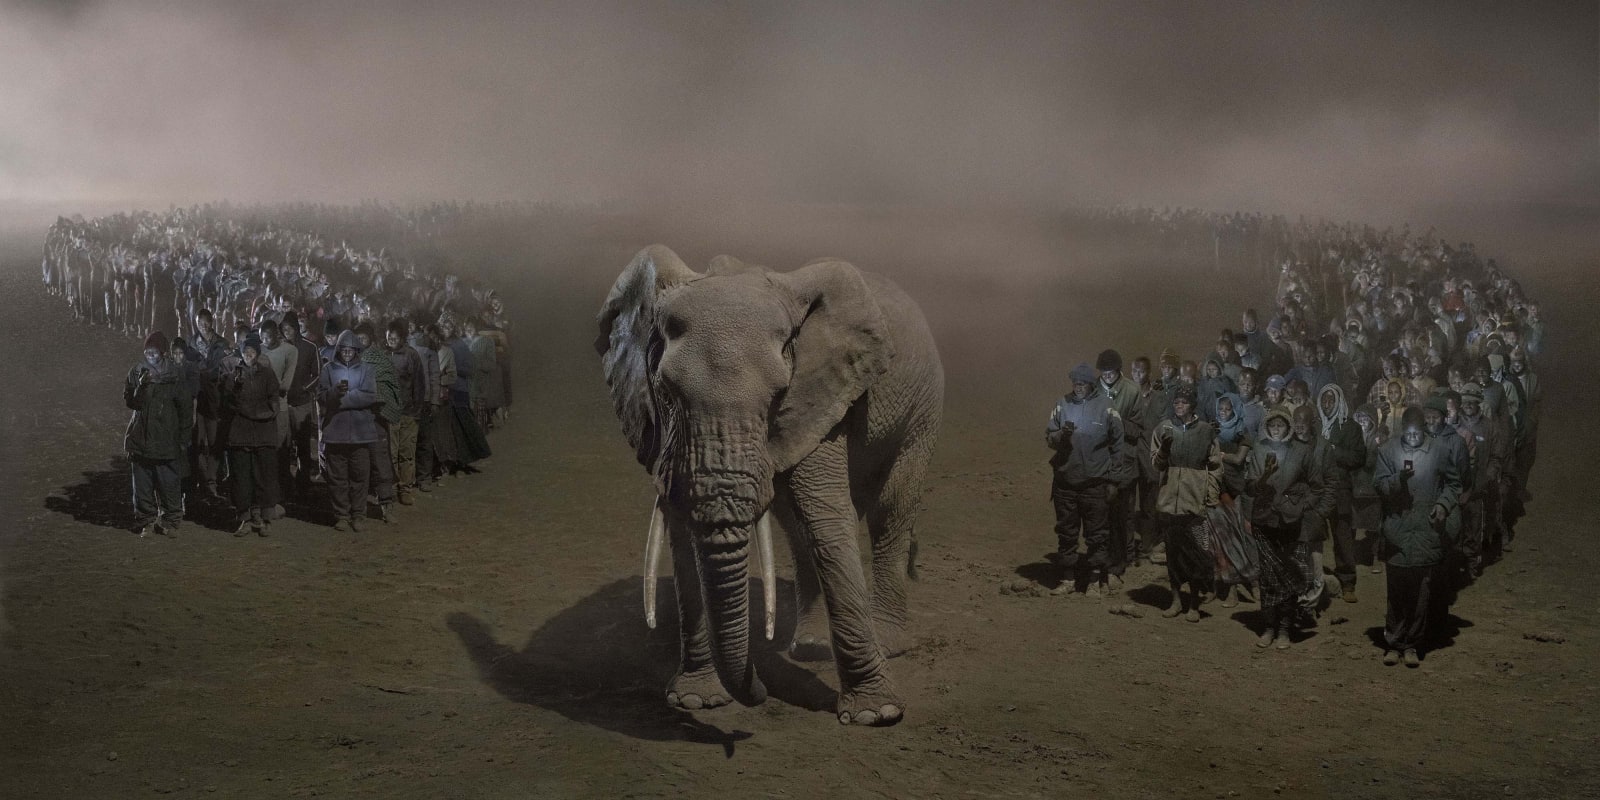 Nick Brandt, River of People With Elephant at Night, 2018